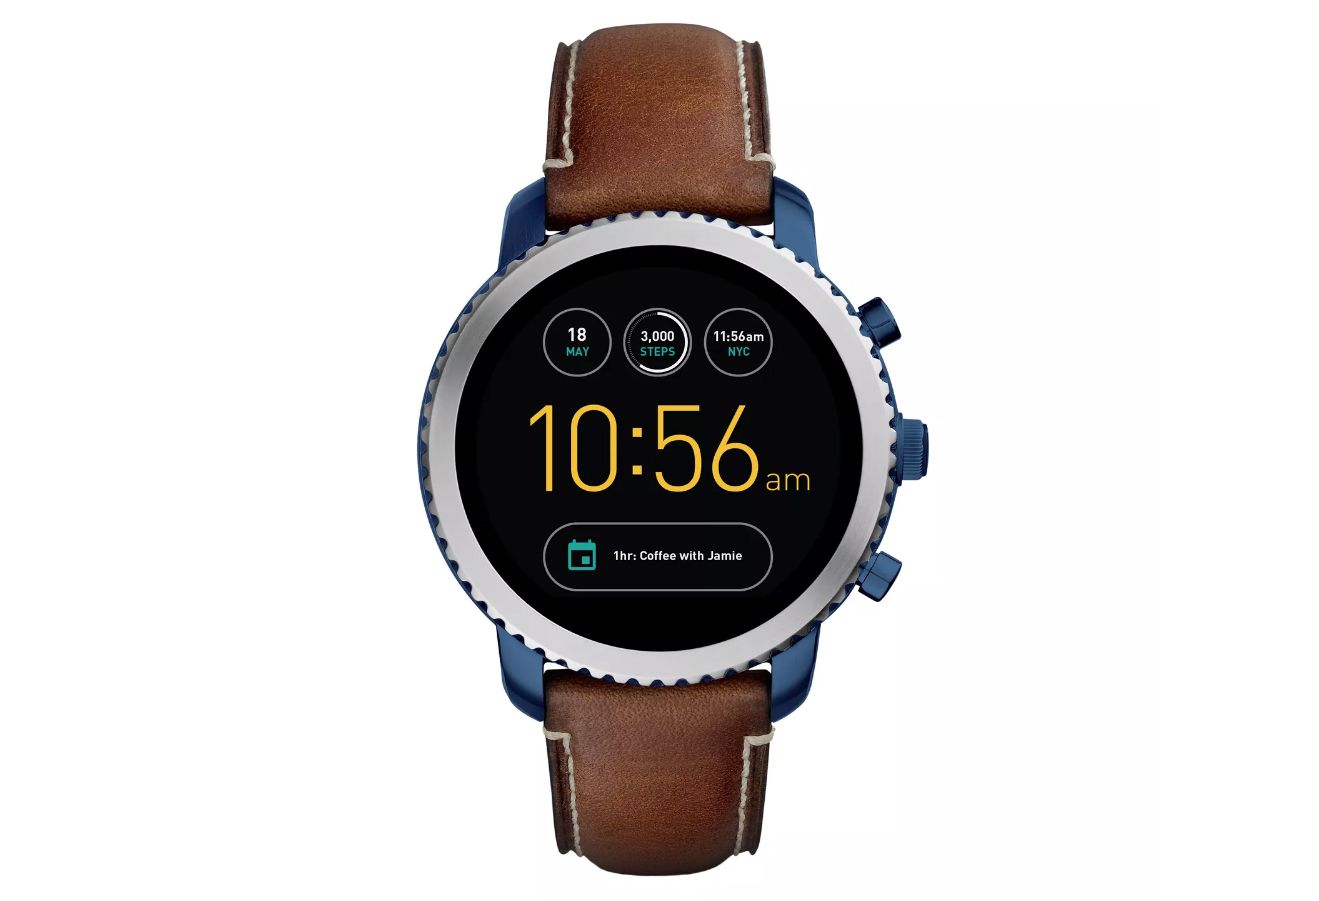 fossil bets the house on smartwatches and hybrids adds instagram watch faces for 2017 image 1